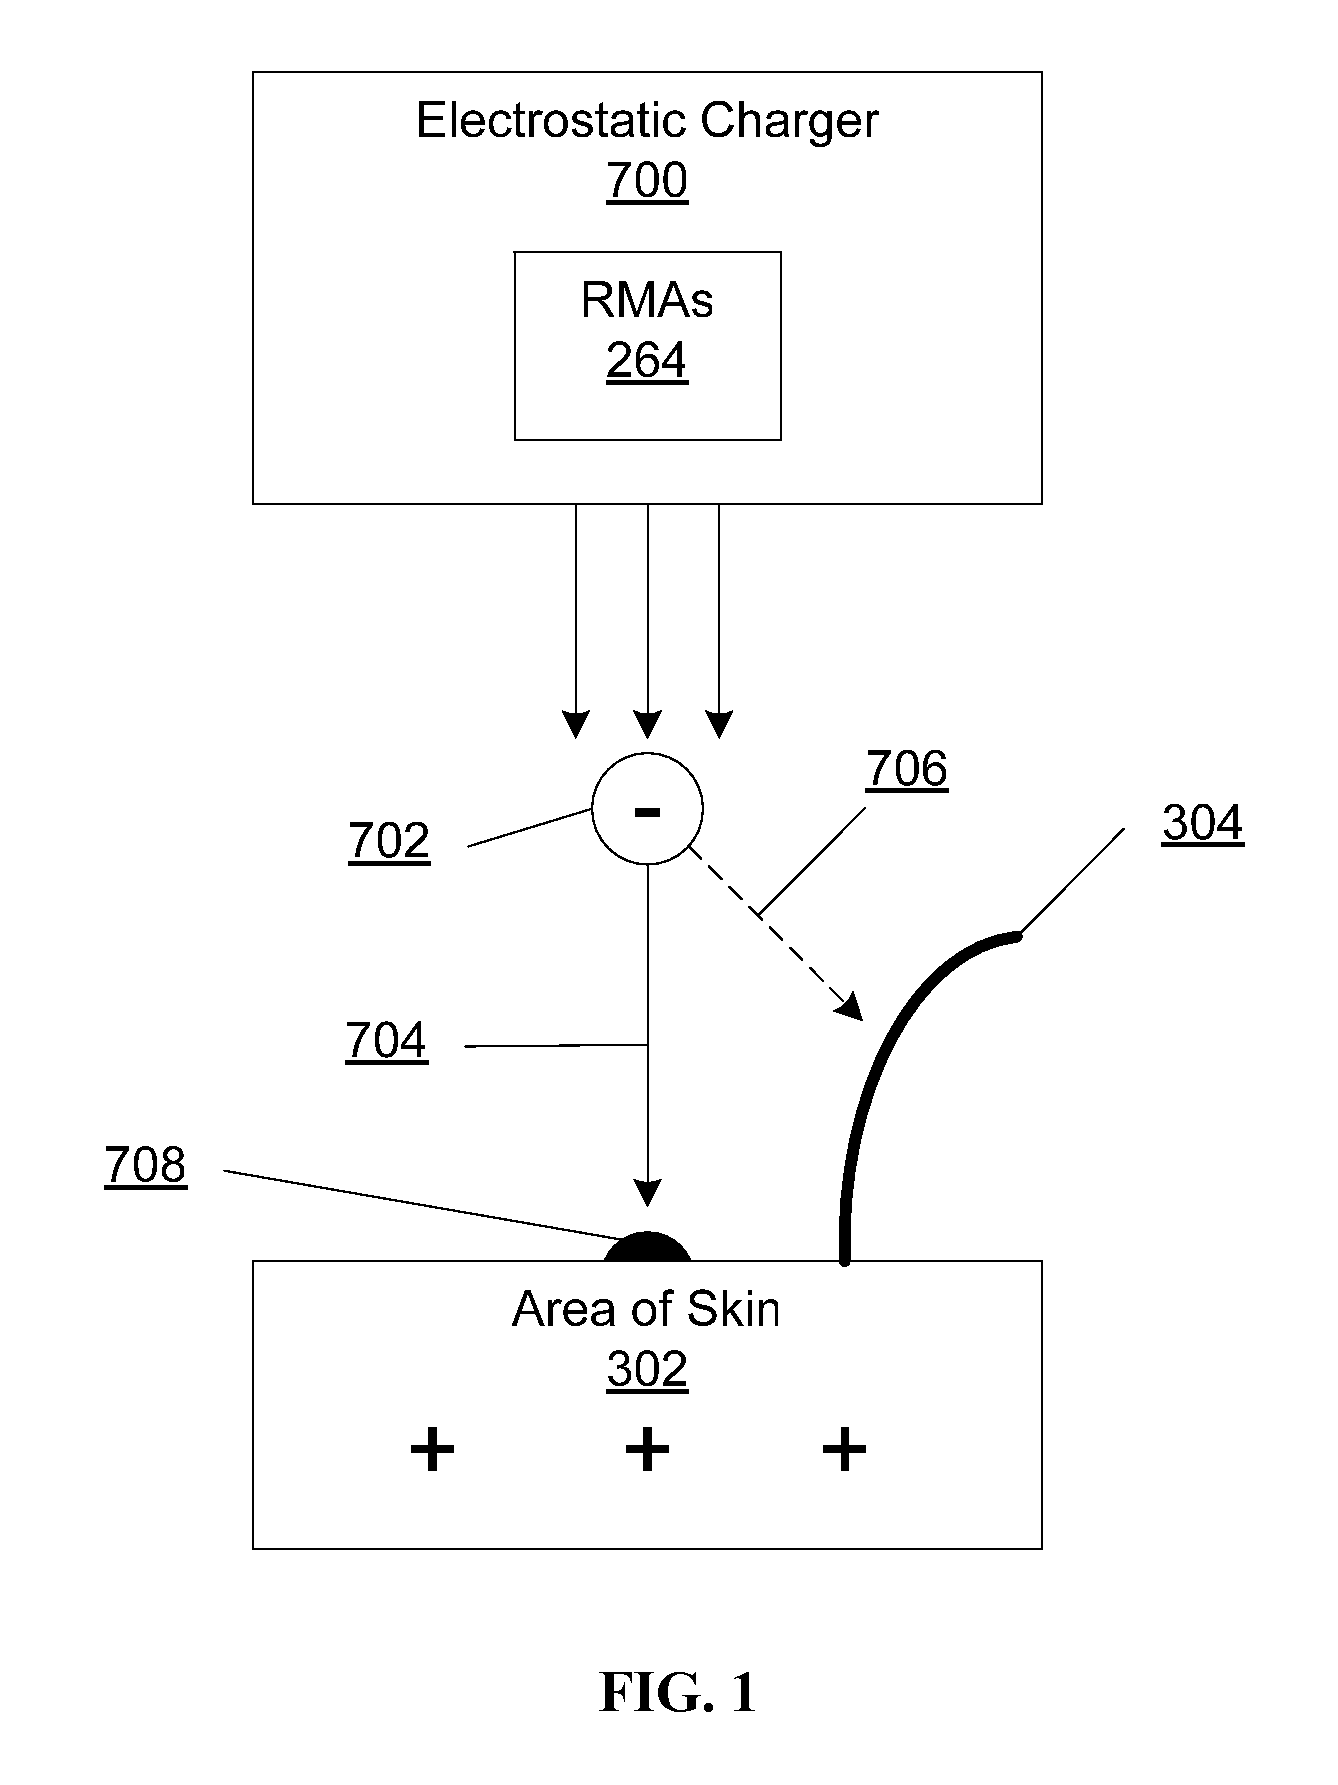 System and method for applying a reflectance modifying agent electrostatically to improve the visual attractiveness of human skin